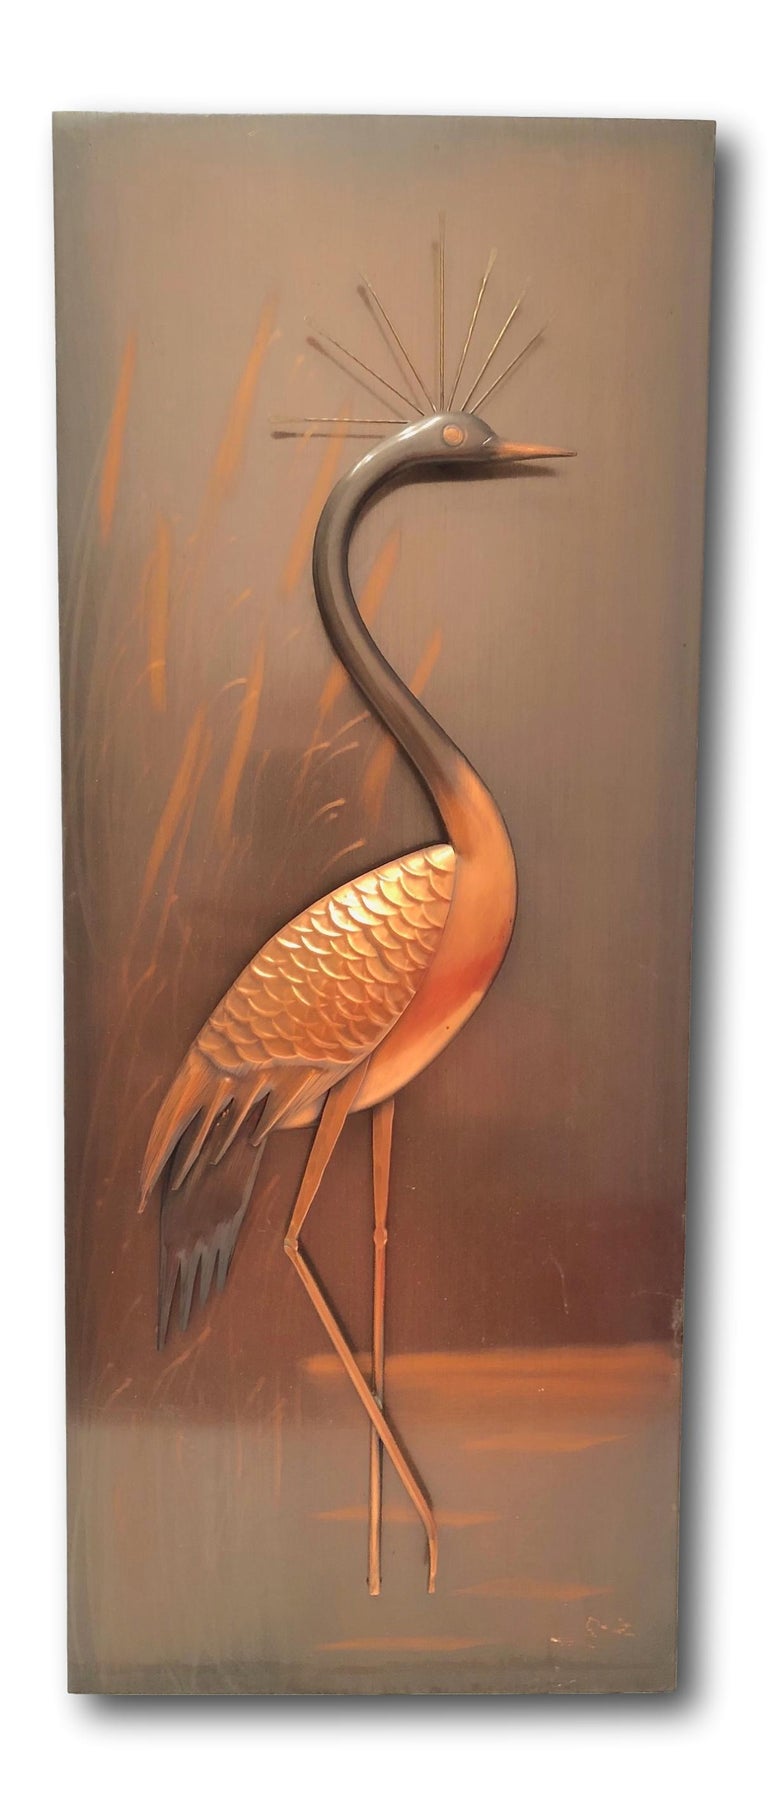 A beautiful, vintage copper crane themed wall decor. It would make a beautiful wall decoration in a seating or living area. Vibrant colors and excellent craftsmanship. Made in the 1970s it displays the joy of that great era with a bold, yet classy